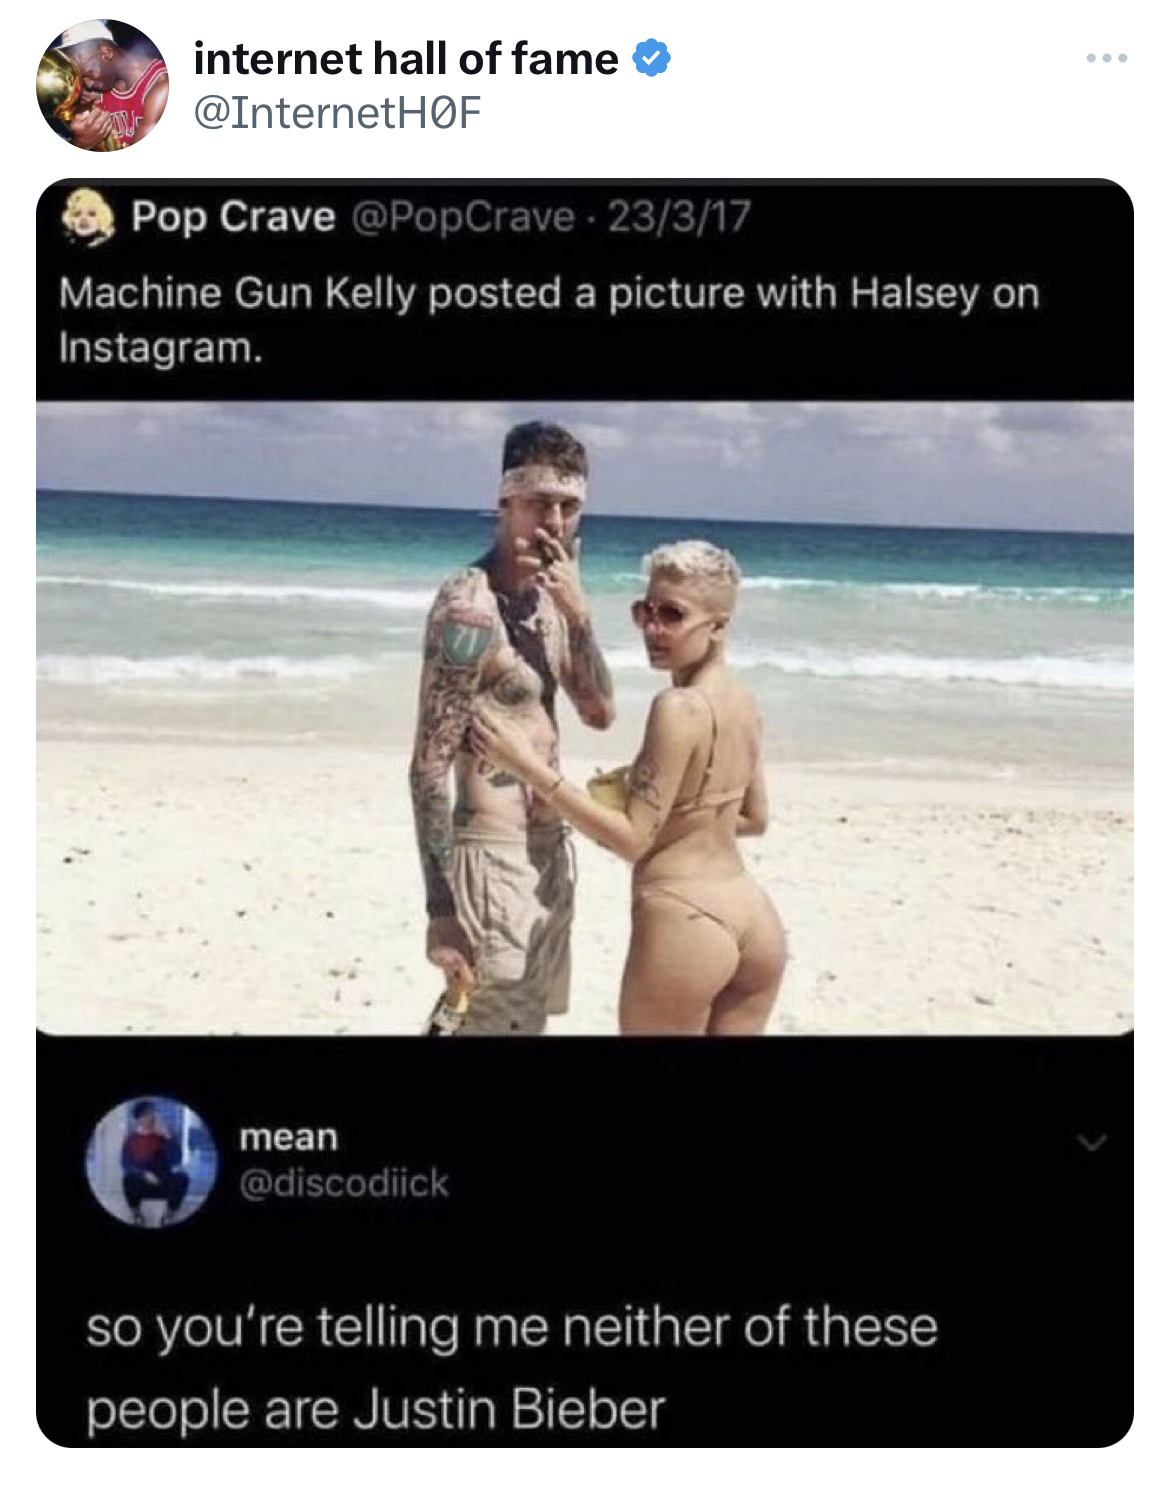 savage absurd tweets vacation - internet hall of fame F Pop Crave 23317 Machine Gun Kelly posted a picture with Halsey on Instagram. mean so you're telling me neither of these people are Justin Bieber